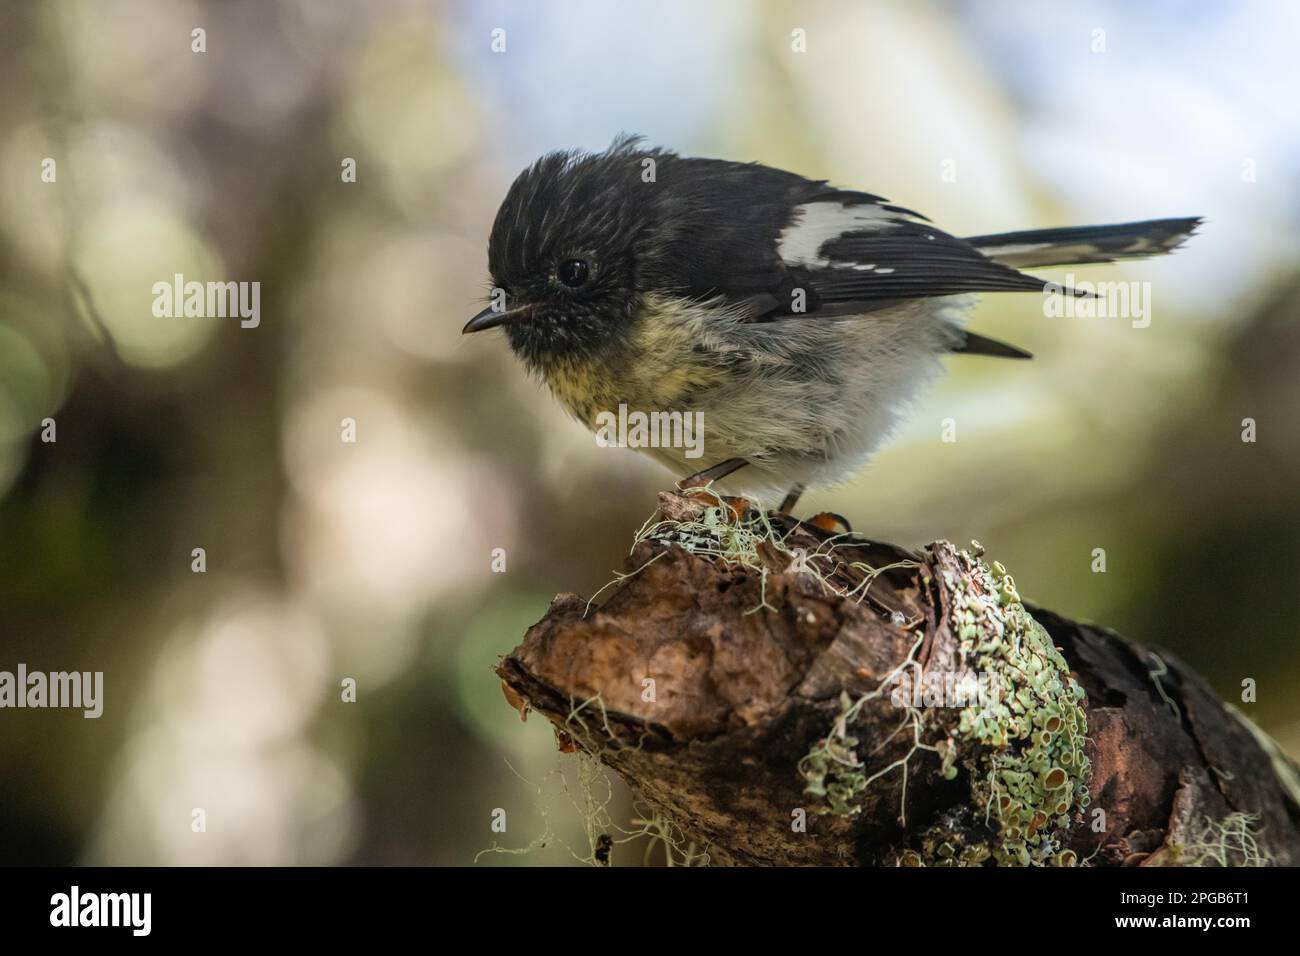 The South island subspecies of titmouse, Petroica macrocephala macrocephala, a bird endemic to New Zealand from Nelson Lakes national park. Stock Photo